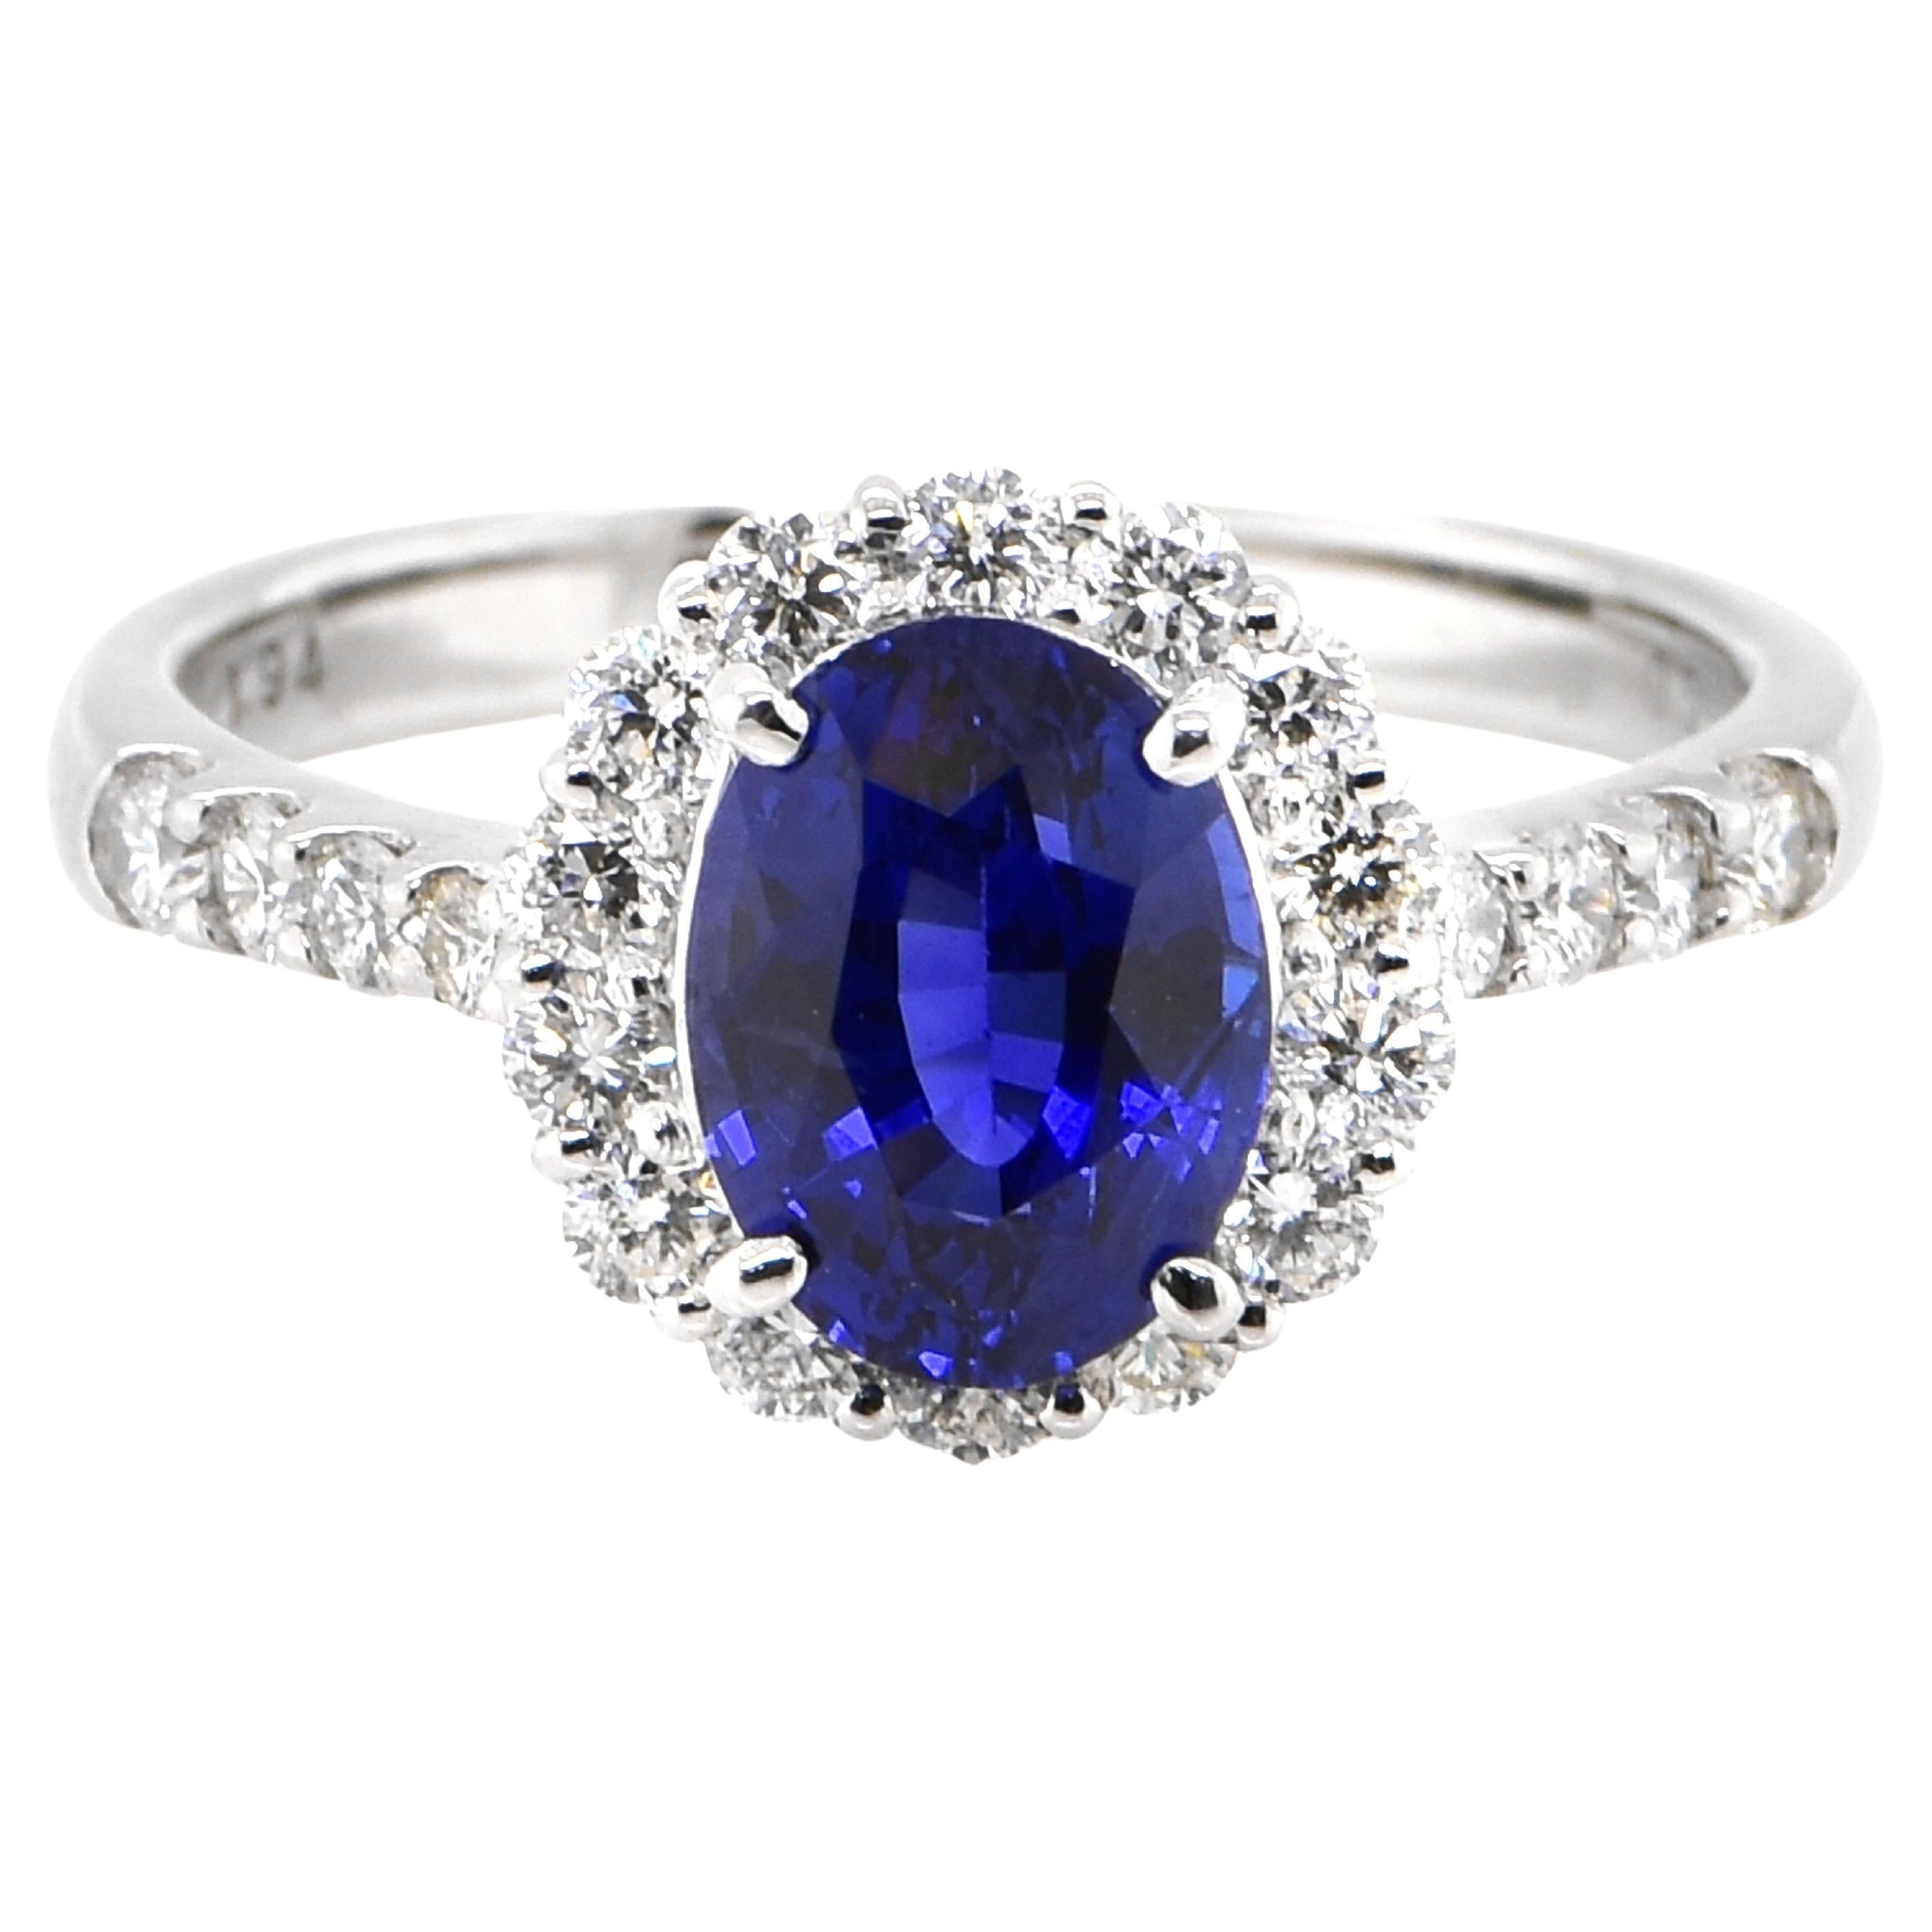 1.92 Carat Natural Royal Blue Sapphire and Diamond Halo Ring Made in Platinum